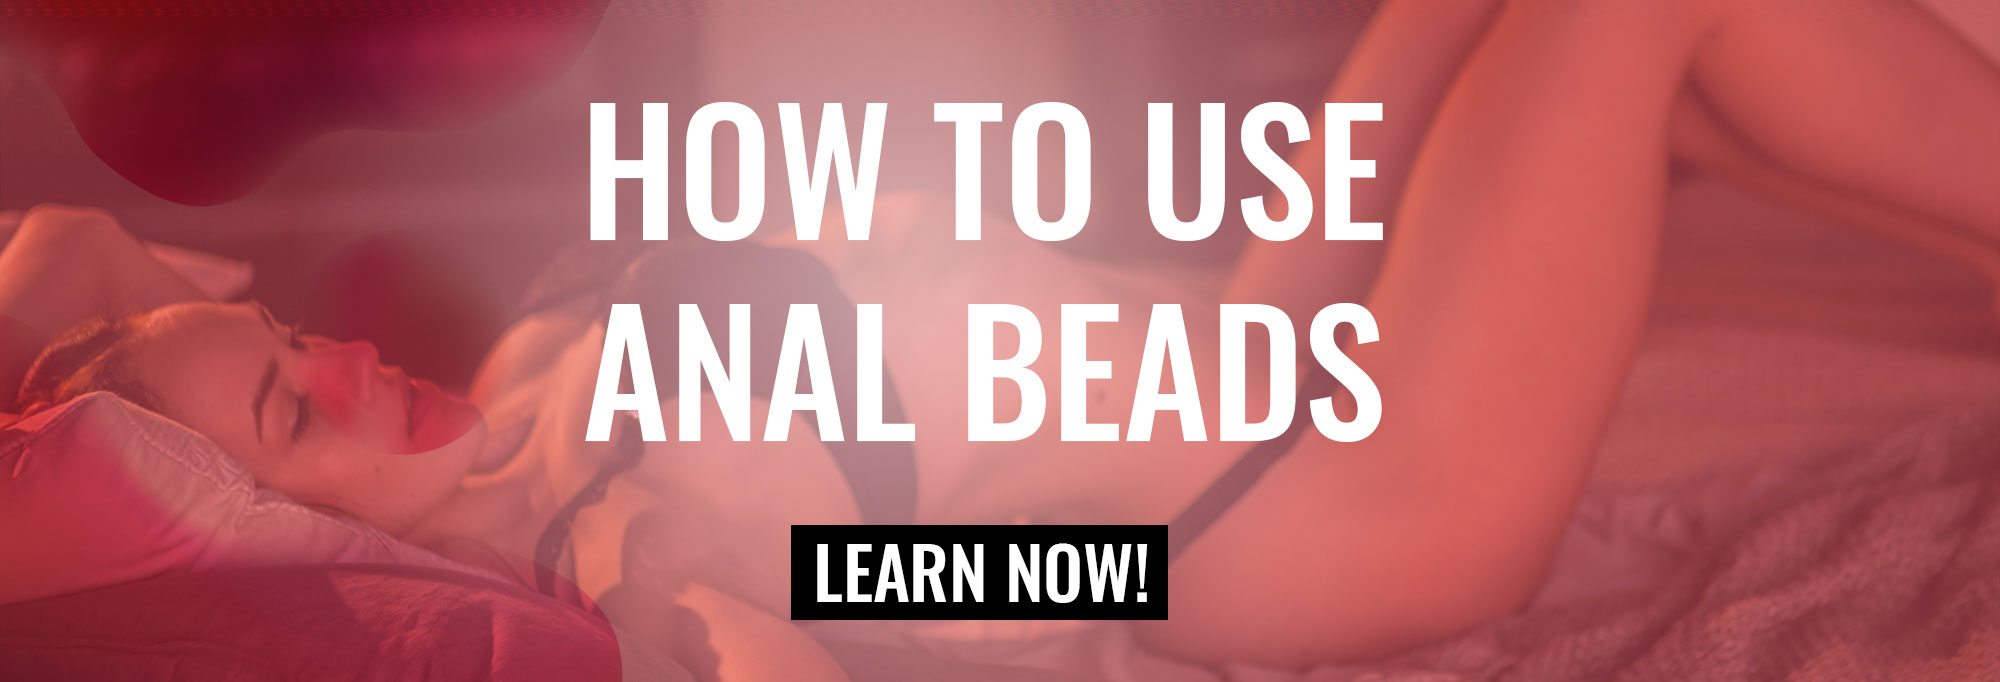 how to use anal beads